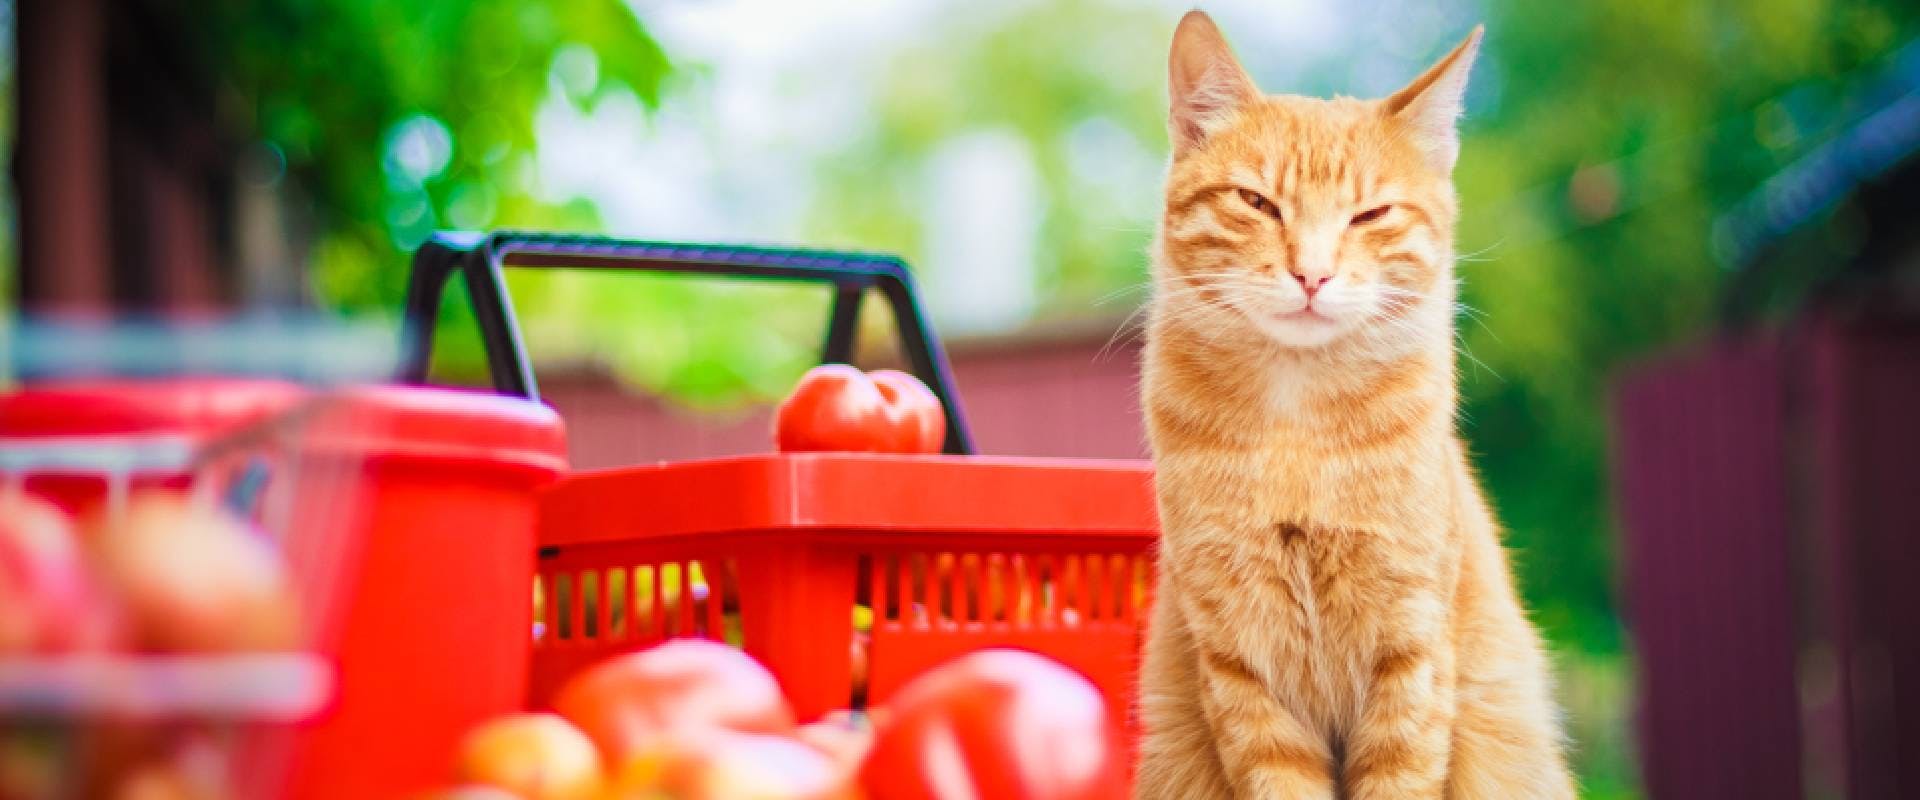 Cat sat next to a basket of tomatoes